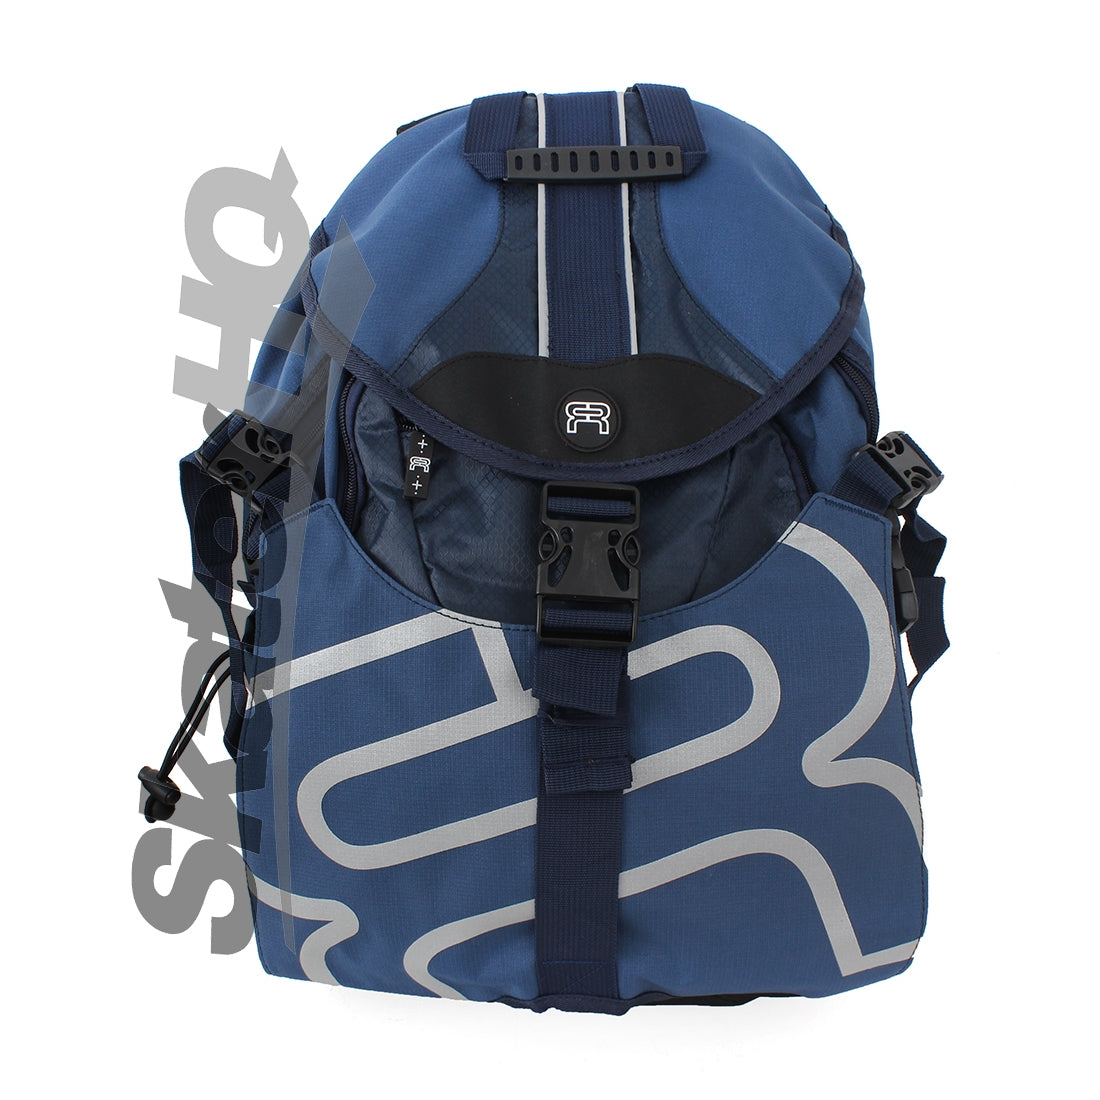 FR Backpack - Navy Bags and Backpacks